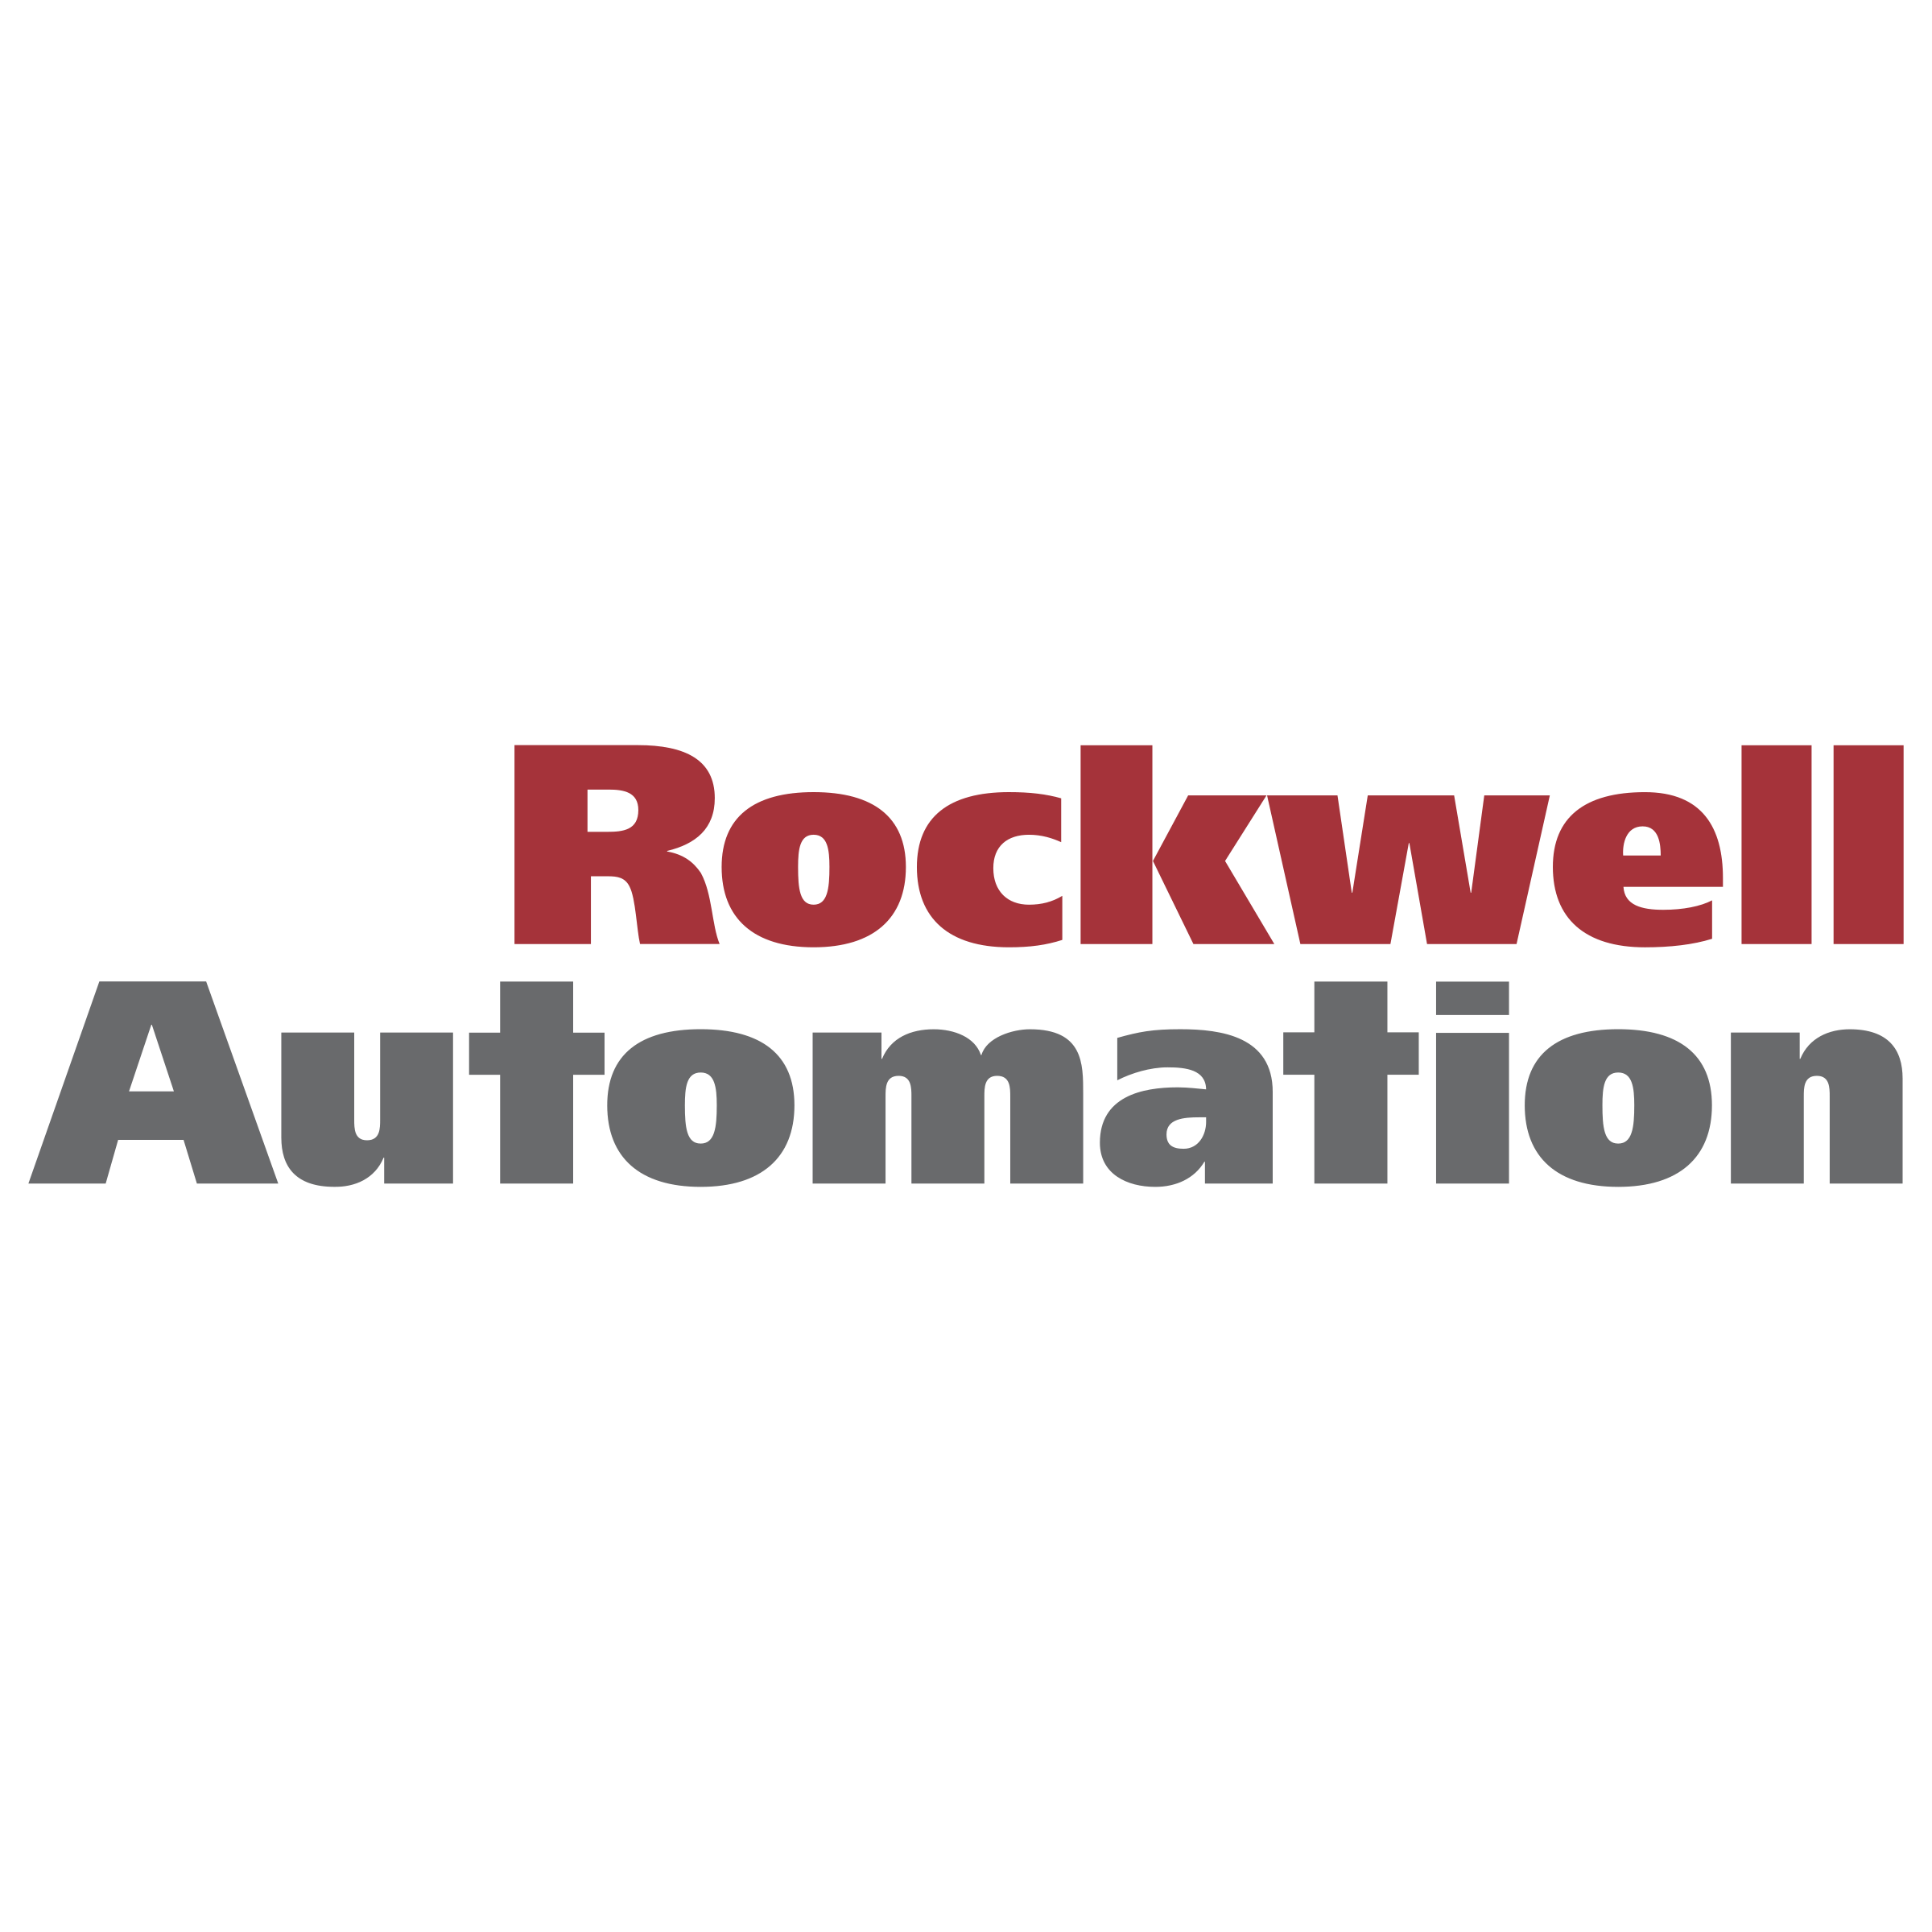 Rockwell Logo - Rockwell Automation Logo PNG Transparent & SVG Vector